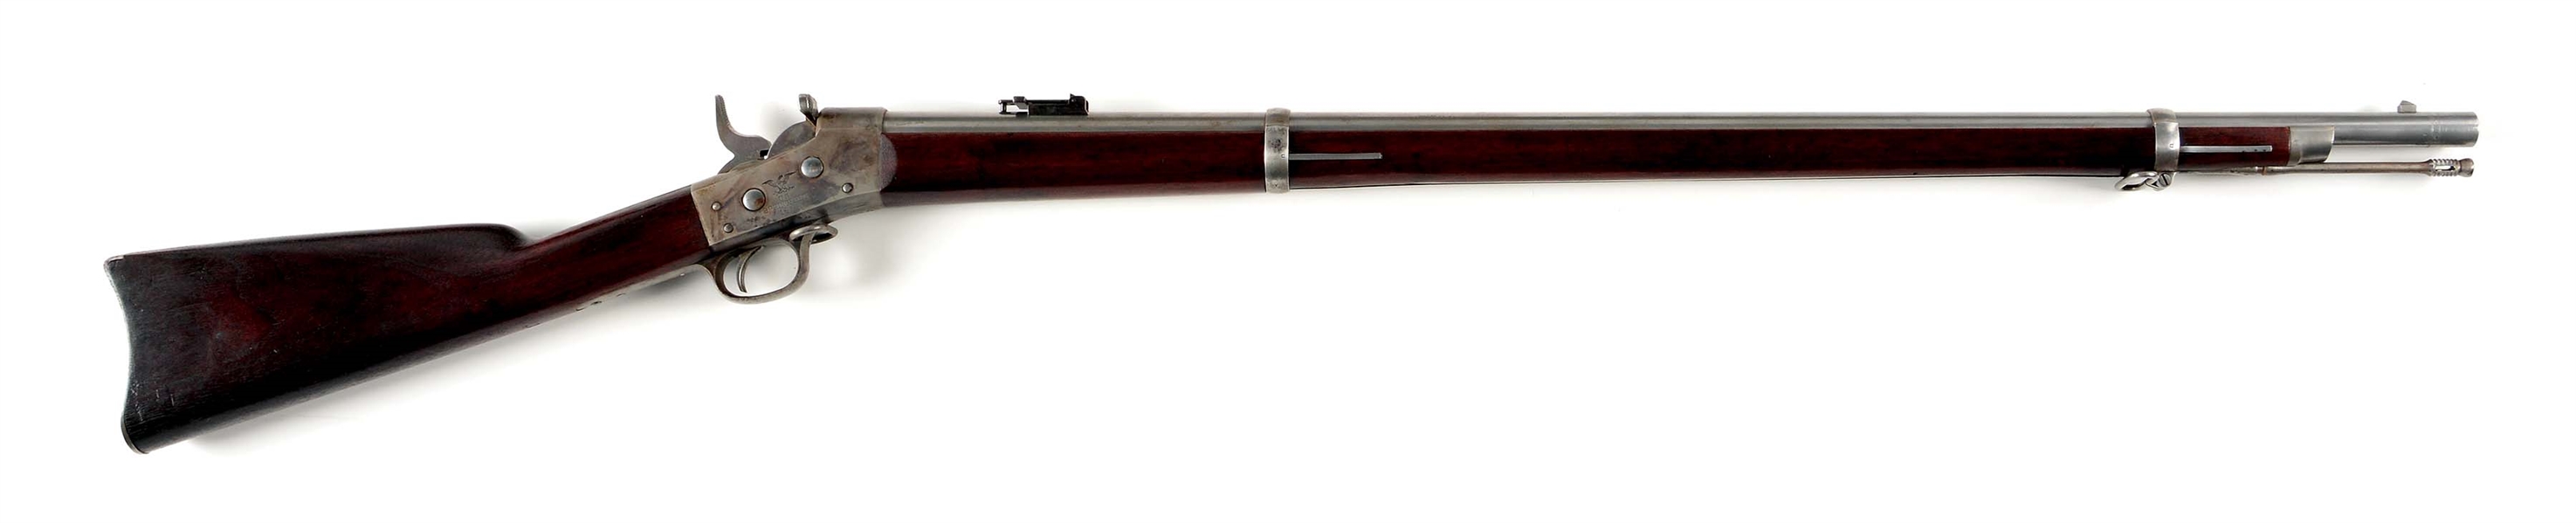 (A) US ARMY MODEL 1870 SPRINGFIELD-REMINGTON ROLLING BLOCK RIFLE.